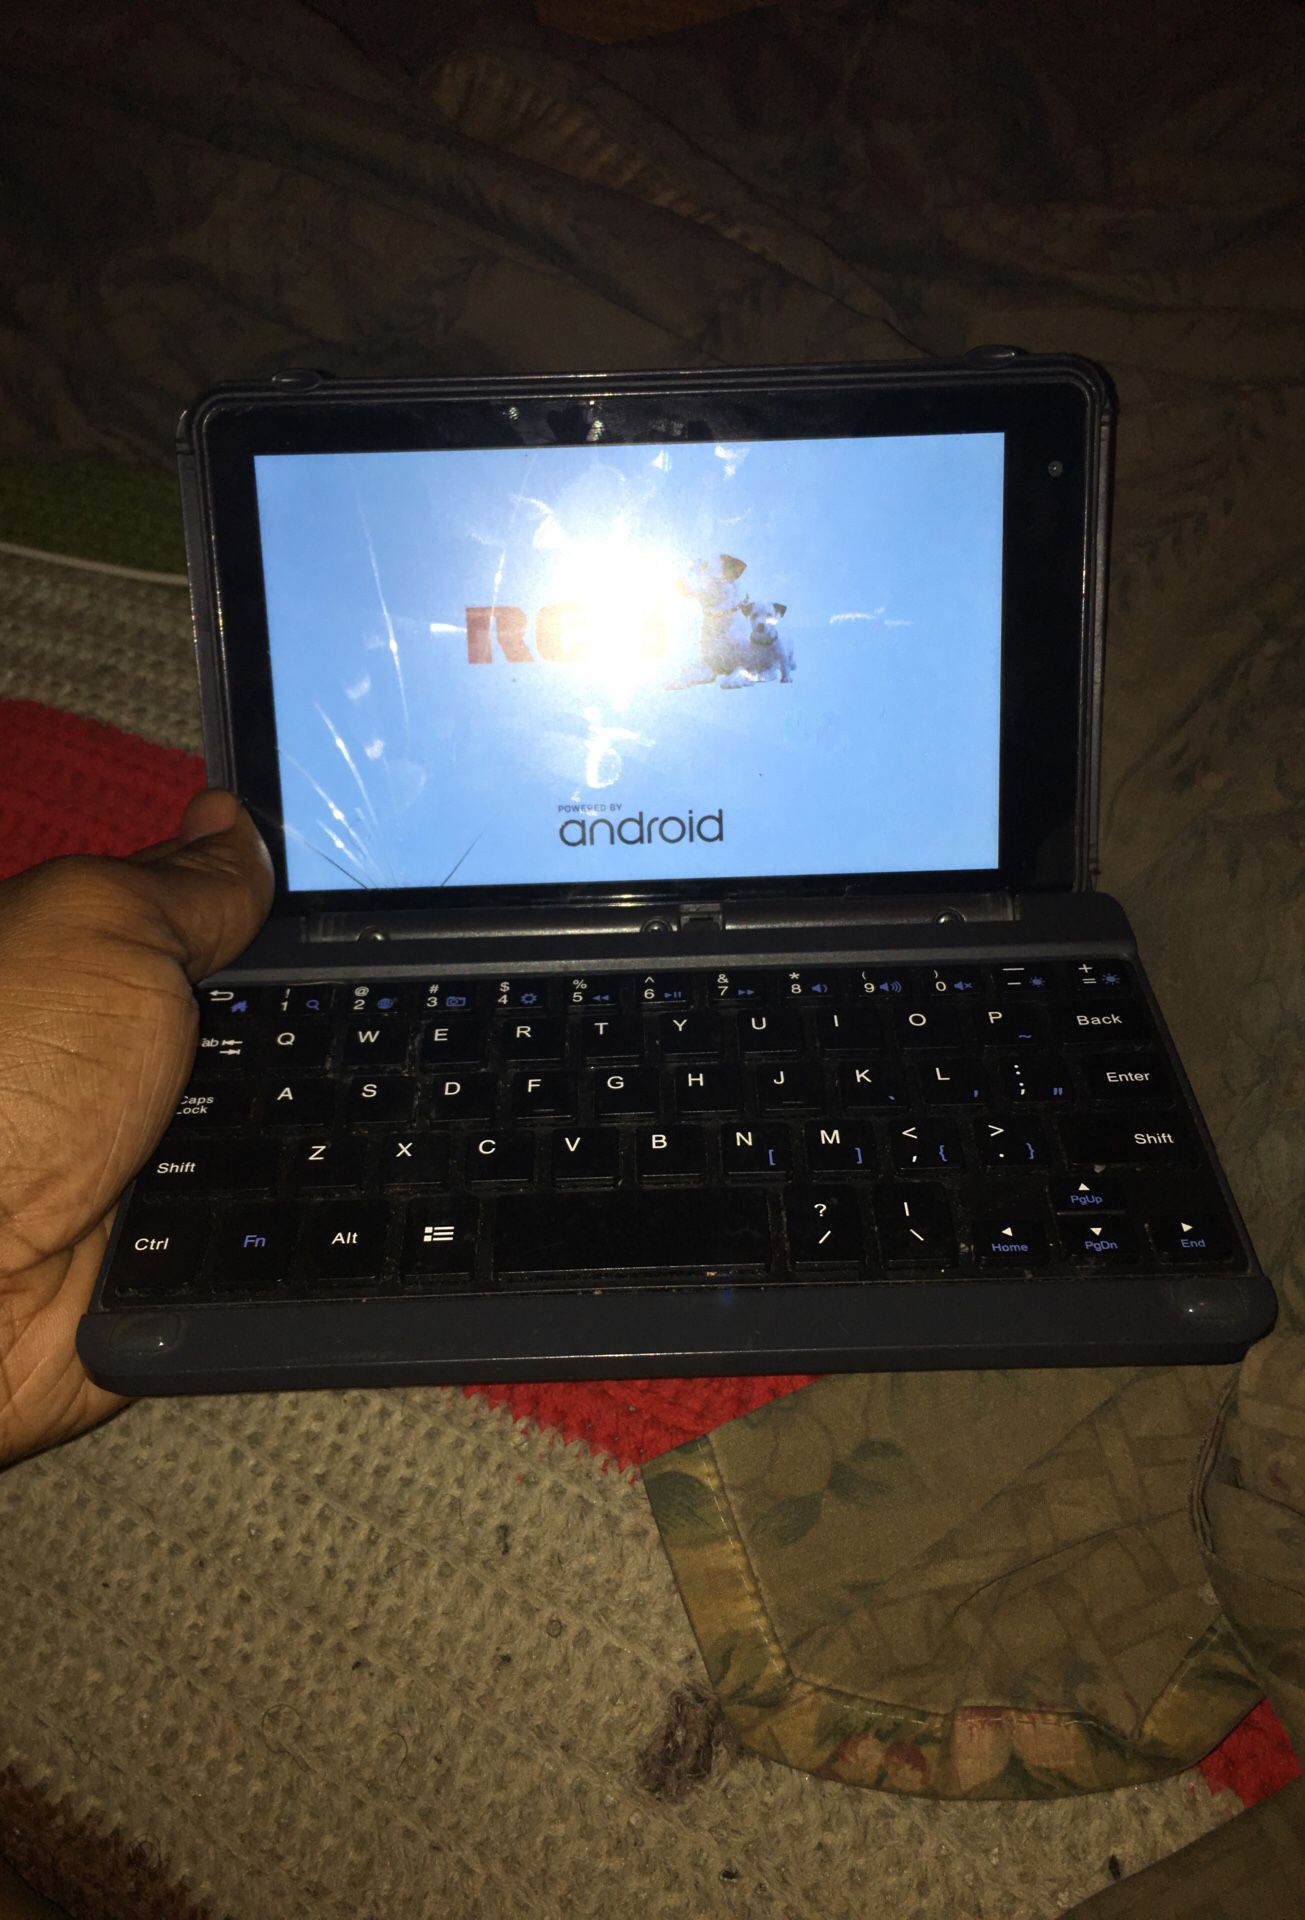 CRACK SCREEN TABLET WORKS GREAT LOVED USING IT